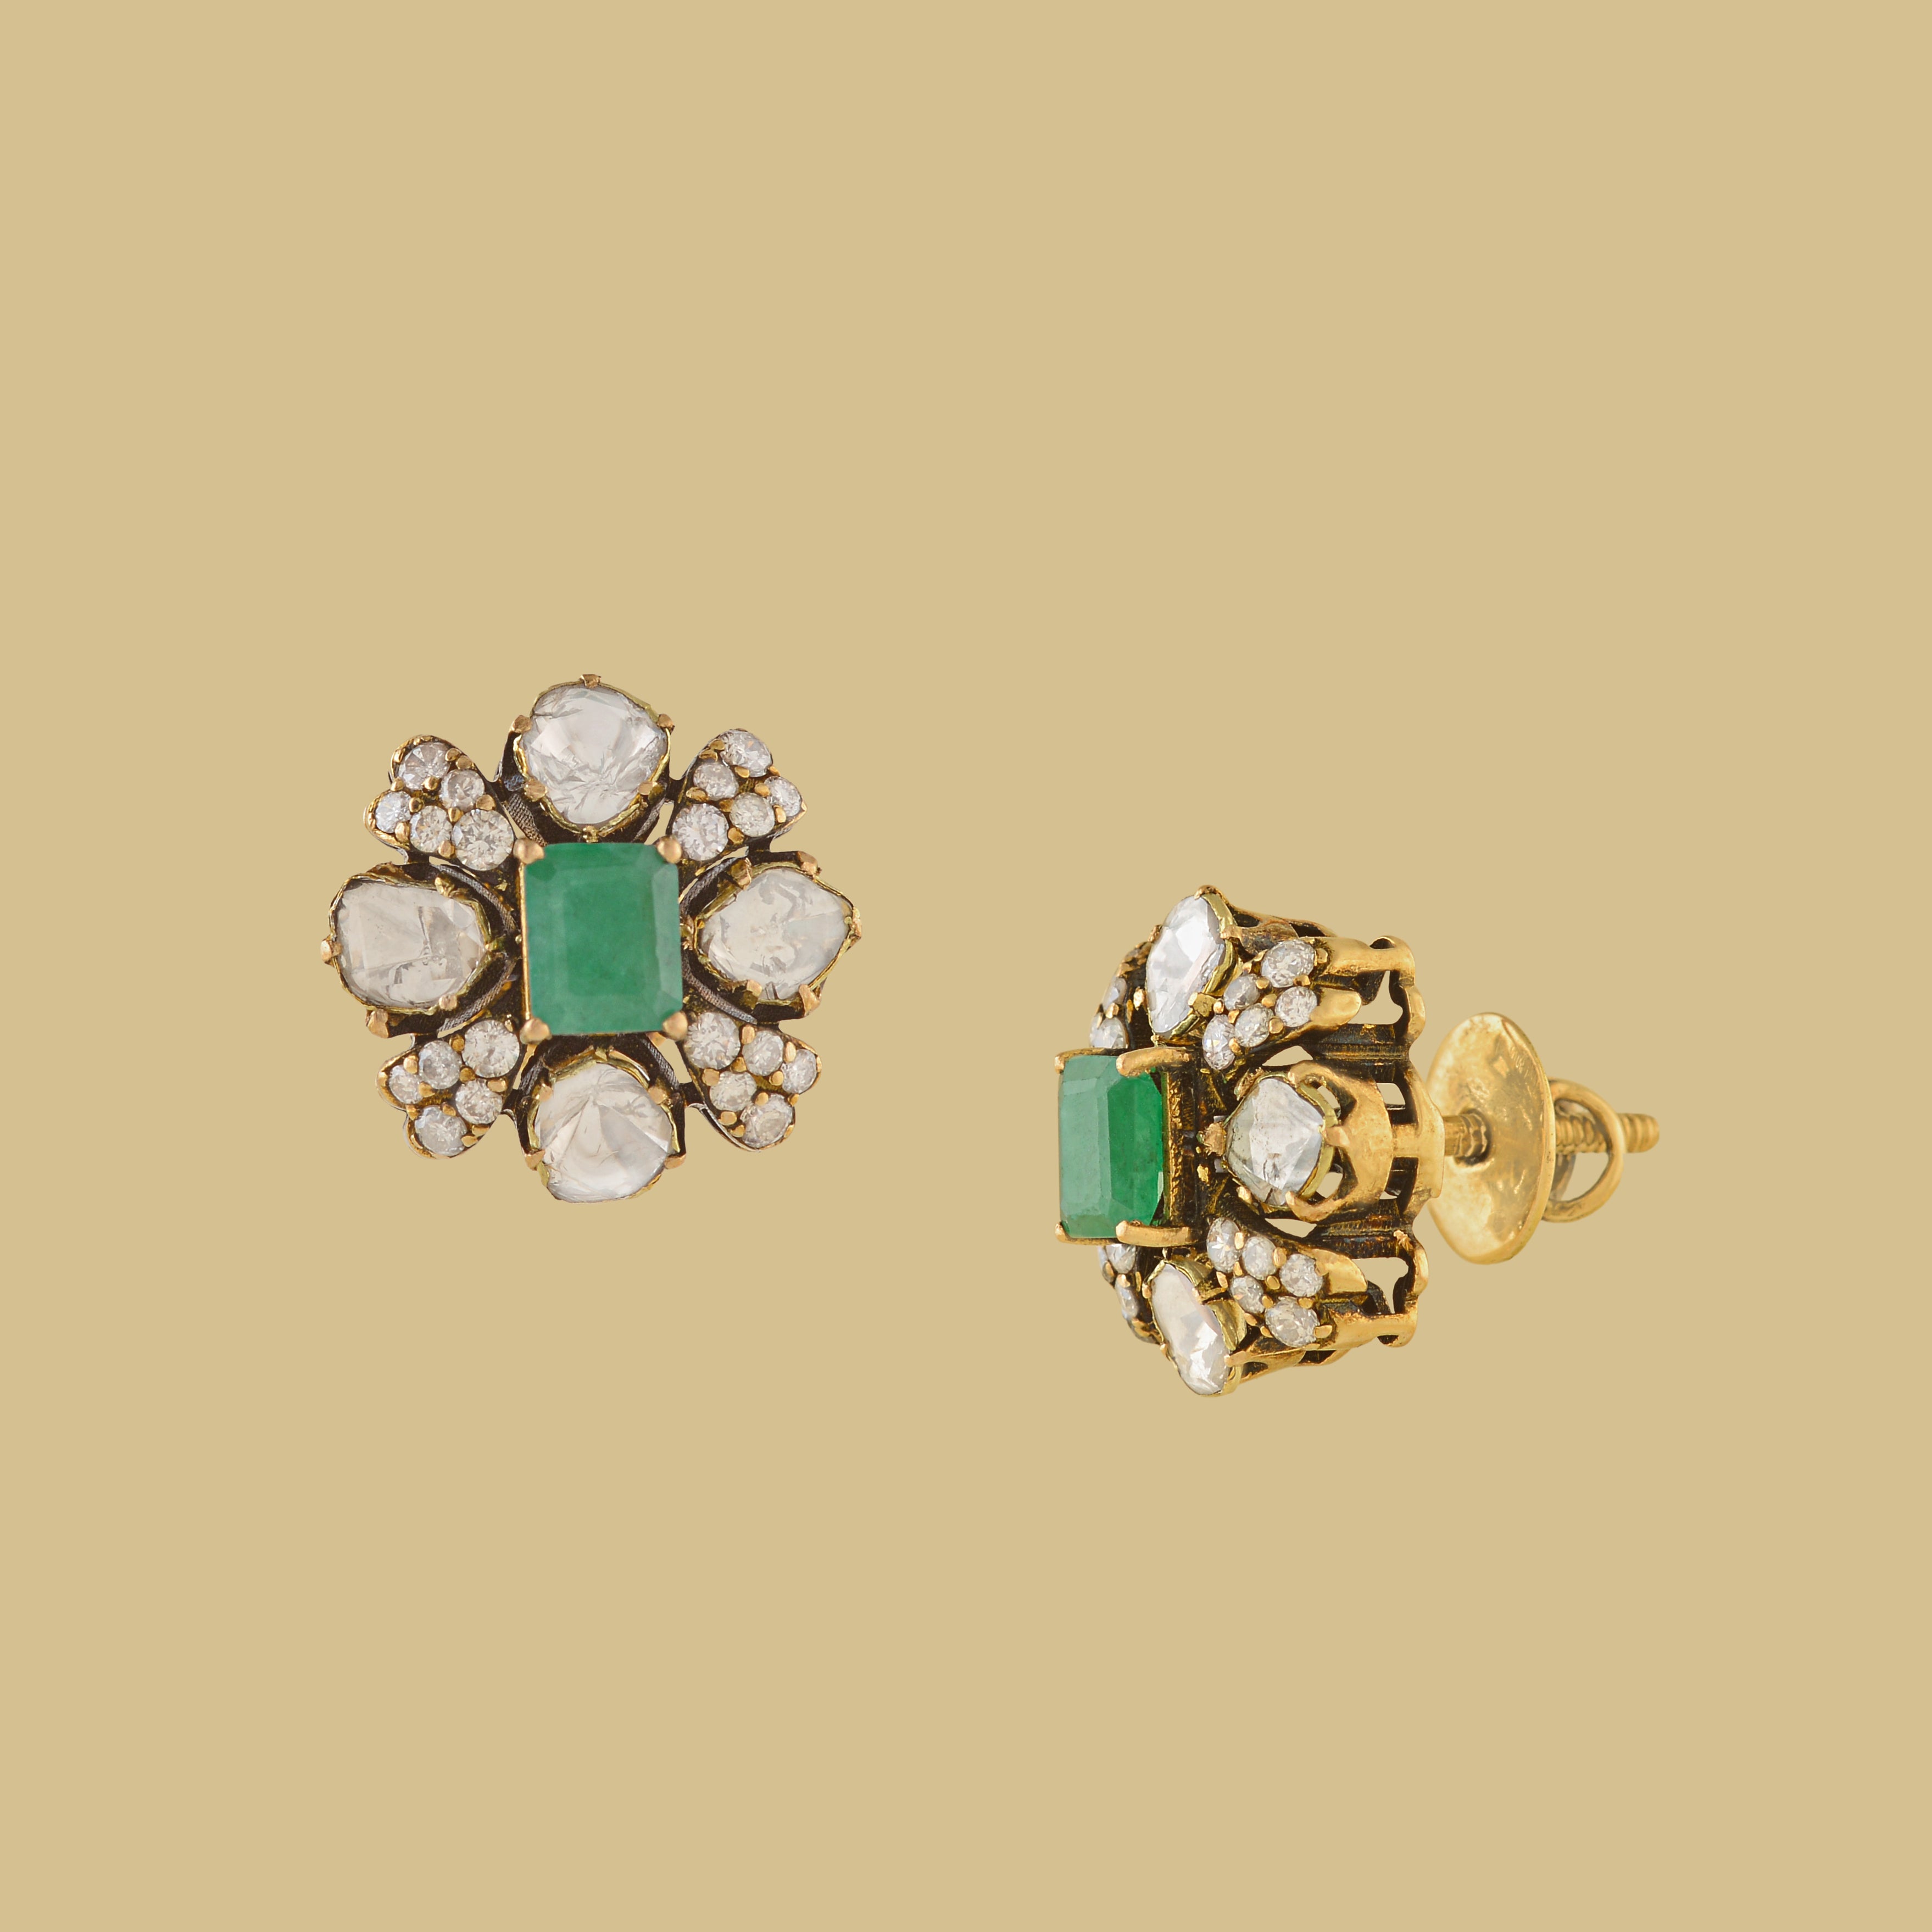 Polki and Emerald Stud Earrings in Antique finish